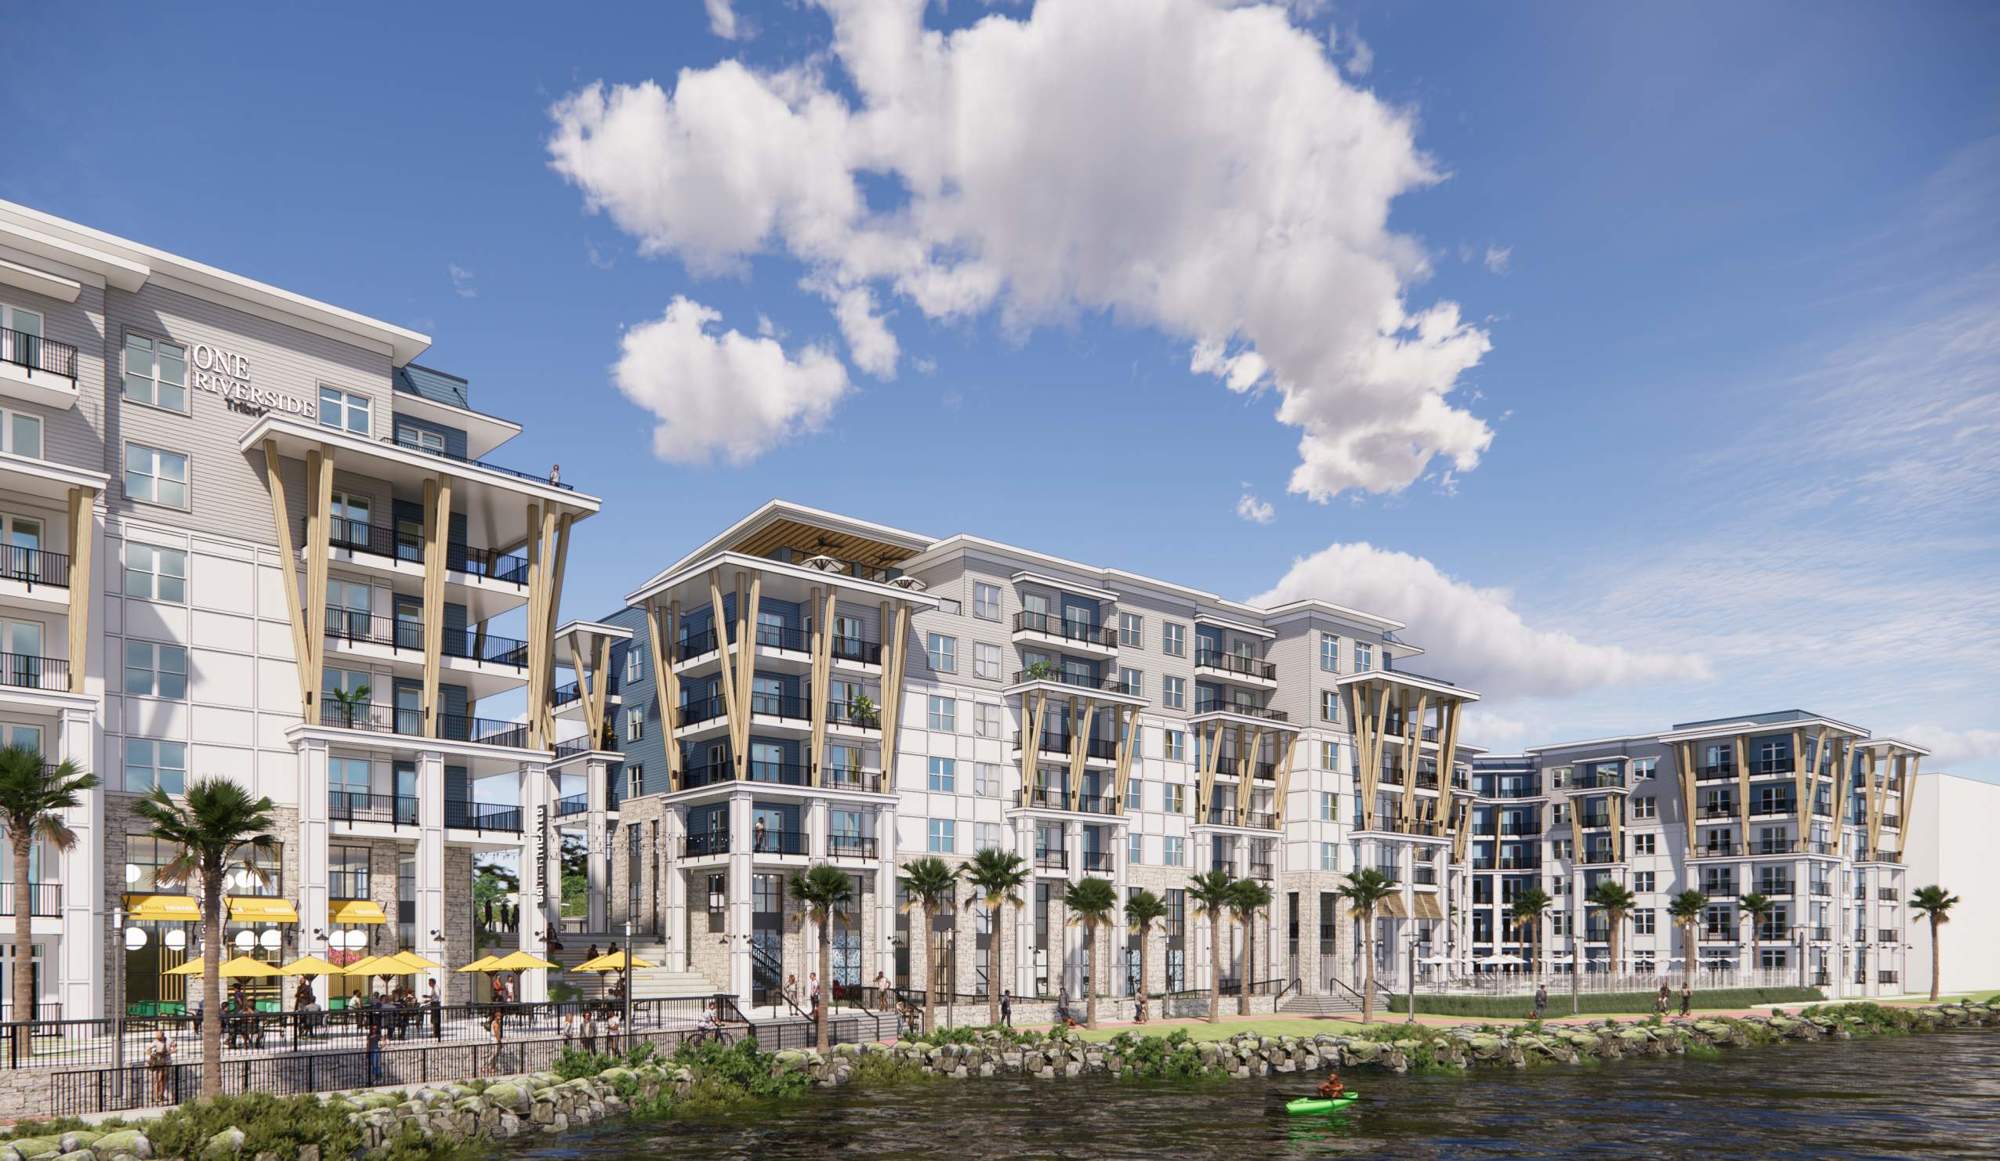 Fuqua Development and partner TriBridge Residential propose a $182.2 million project called One Riverside at the Times-Union site.